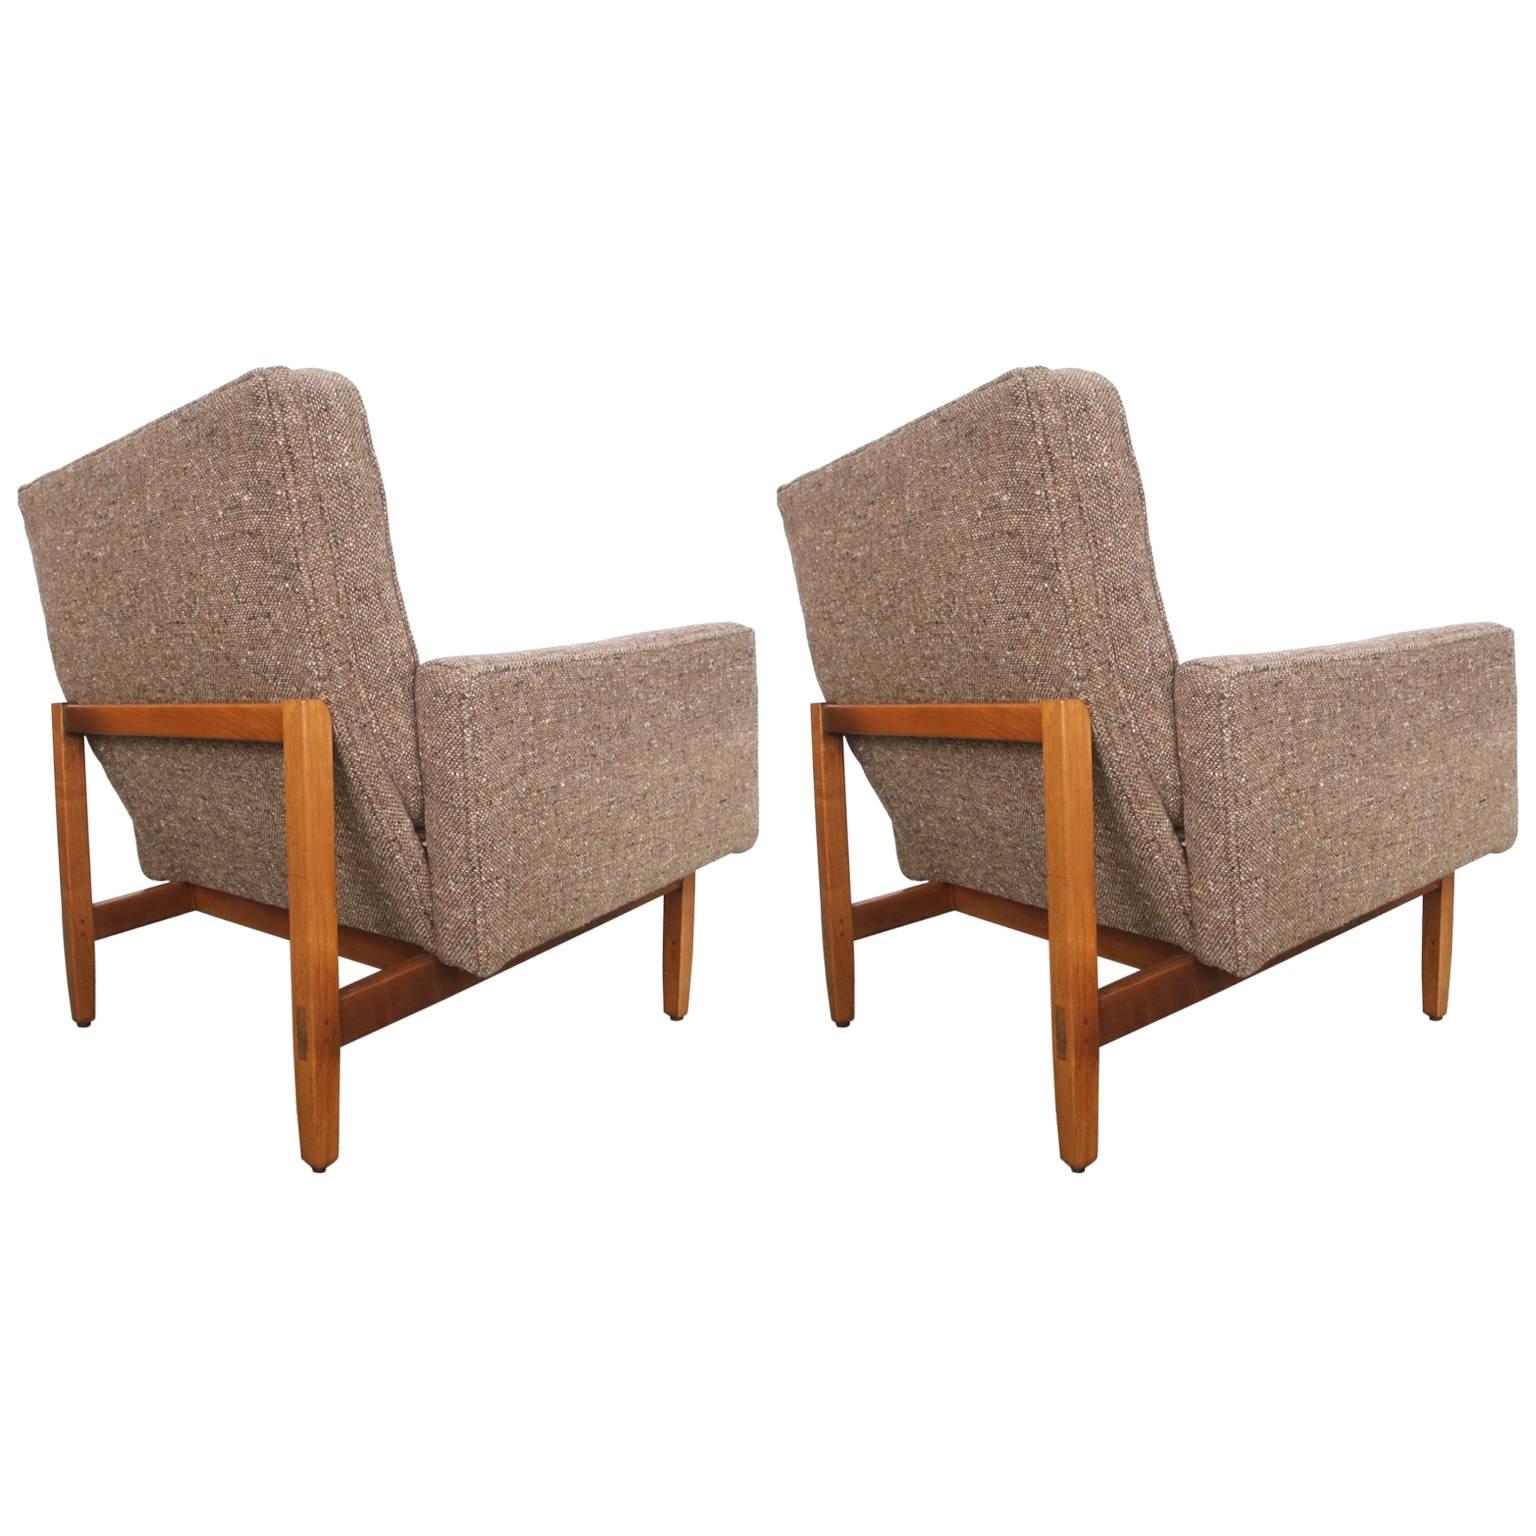 Early Pair of Florence Knoll Lounge Chairs